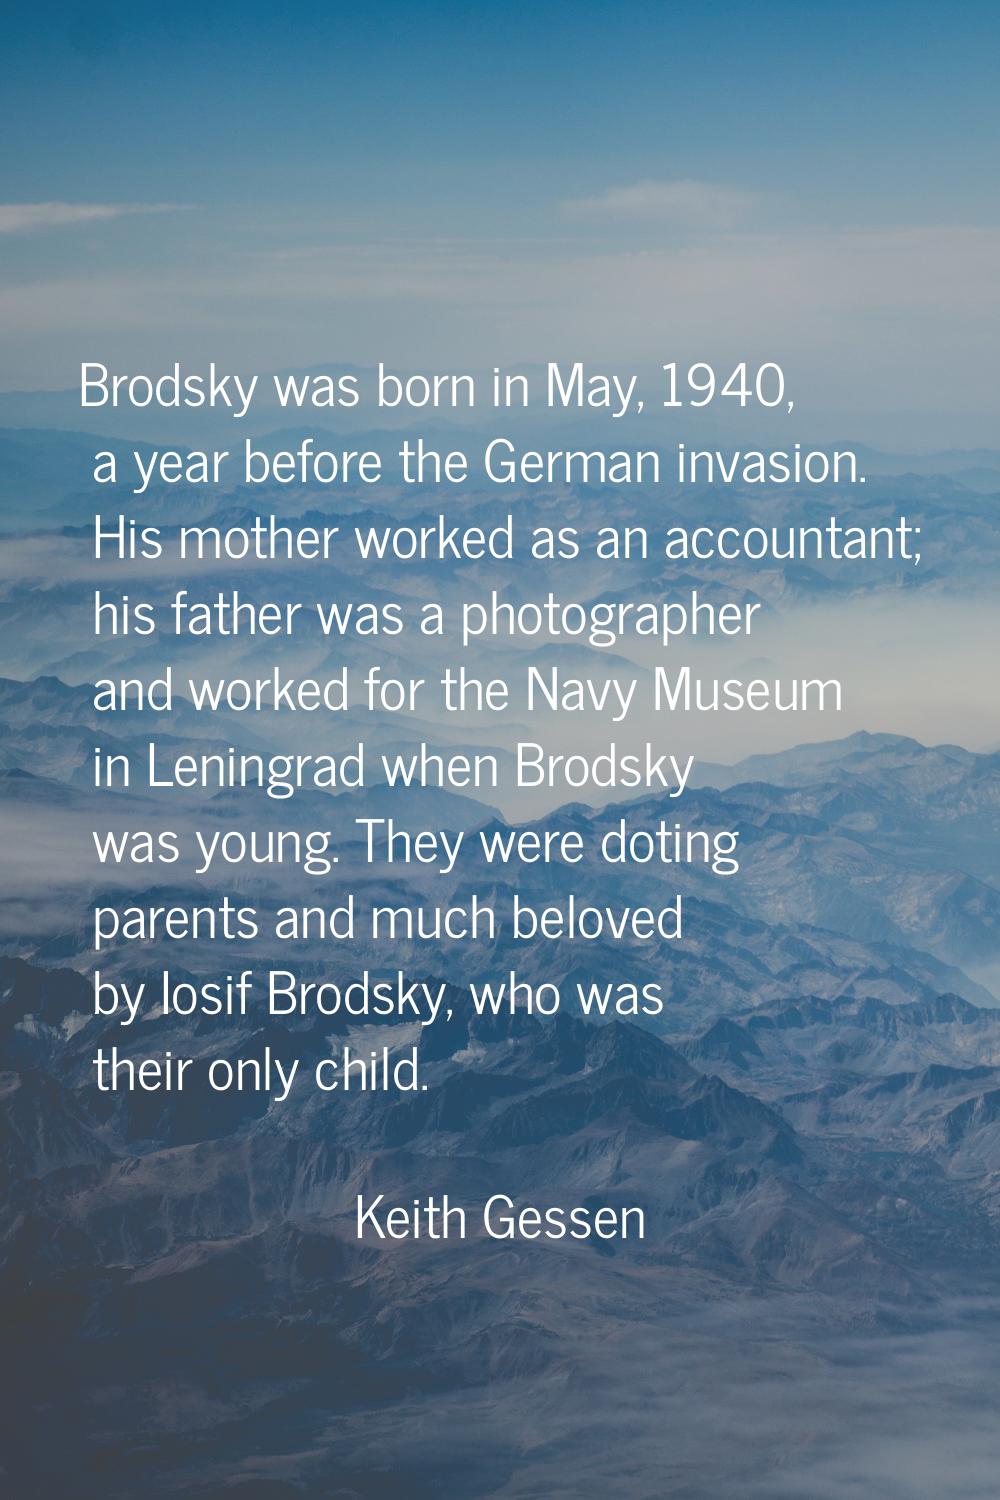 Brodsky was born in May, 1940, a year before the German invasion. His mother worked as an accountan